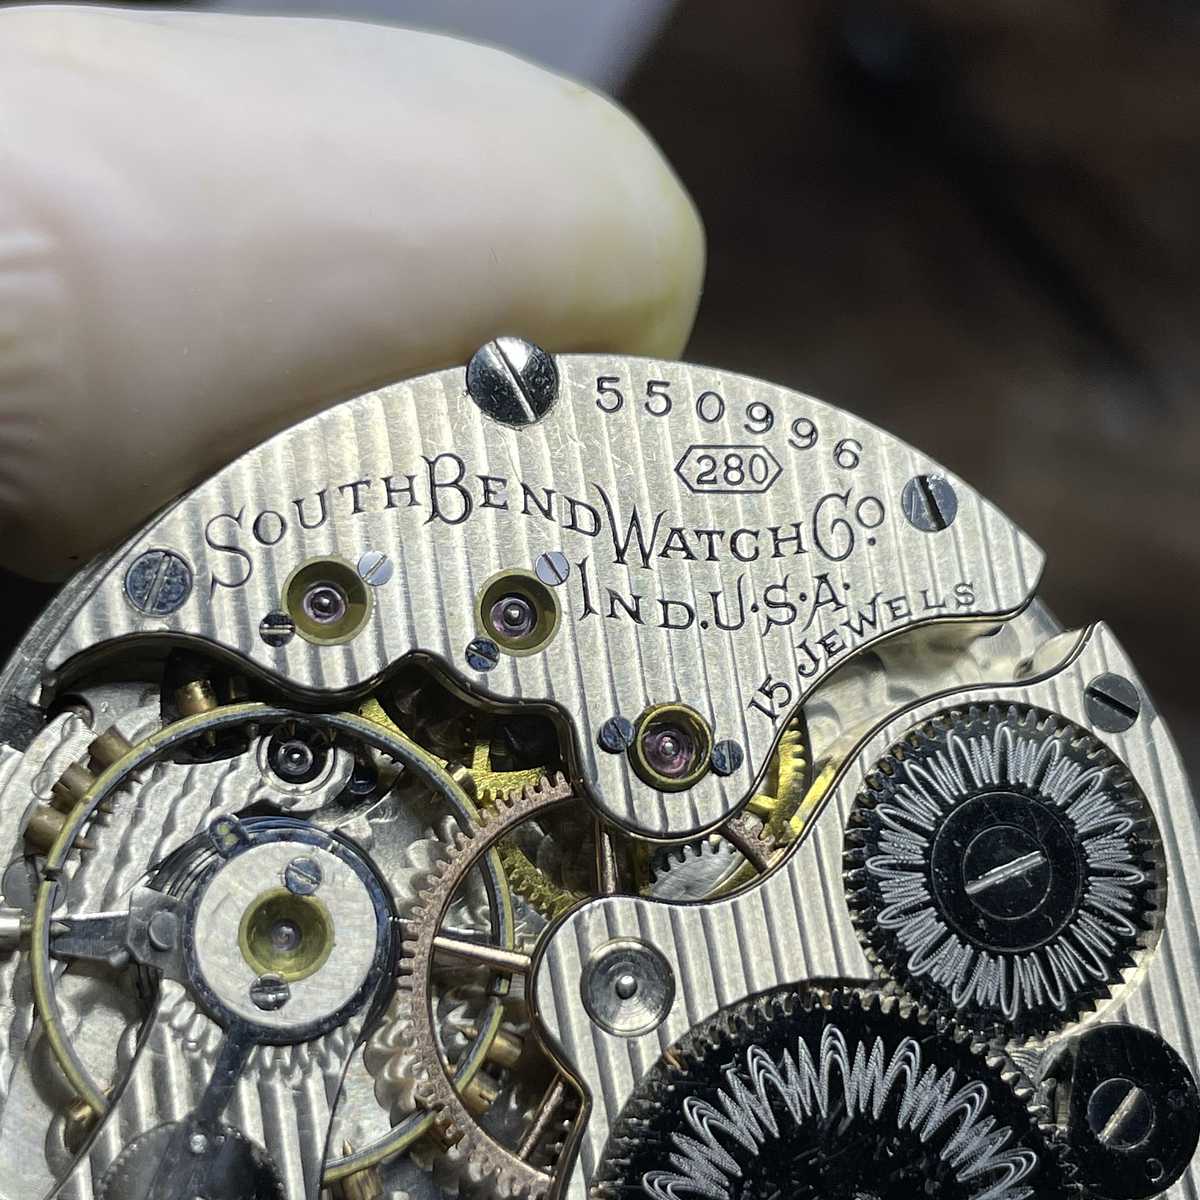 1909 South Bend Watch Grade 280 Serial number on the movement